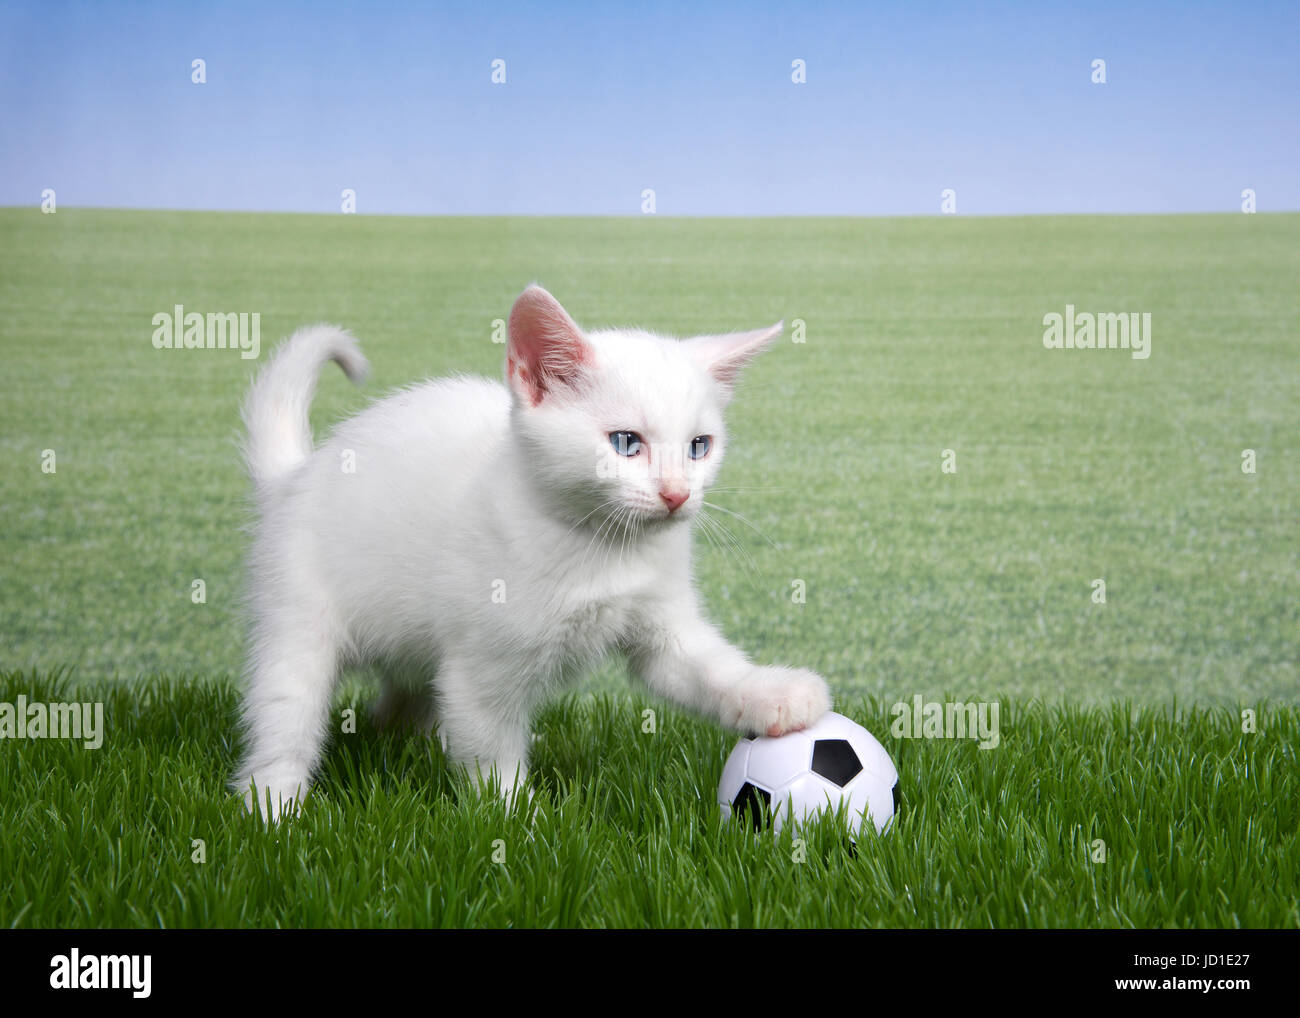 One white kitten with a miniature soccer ball playing in green grass, paw  on ball, field of grass behind to skyline. Fun sports theme with animals  Stock Photo - Alamy